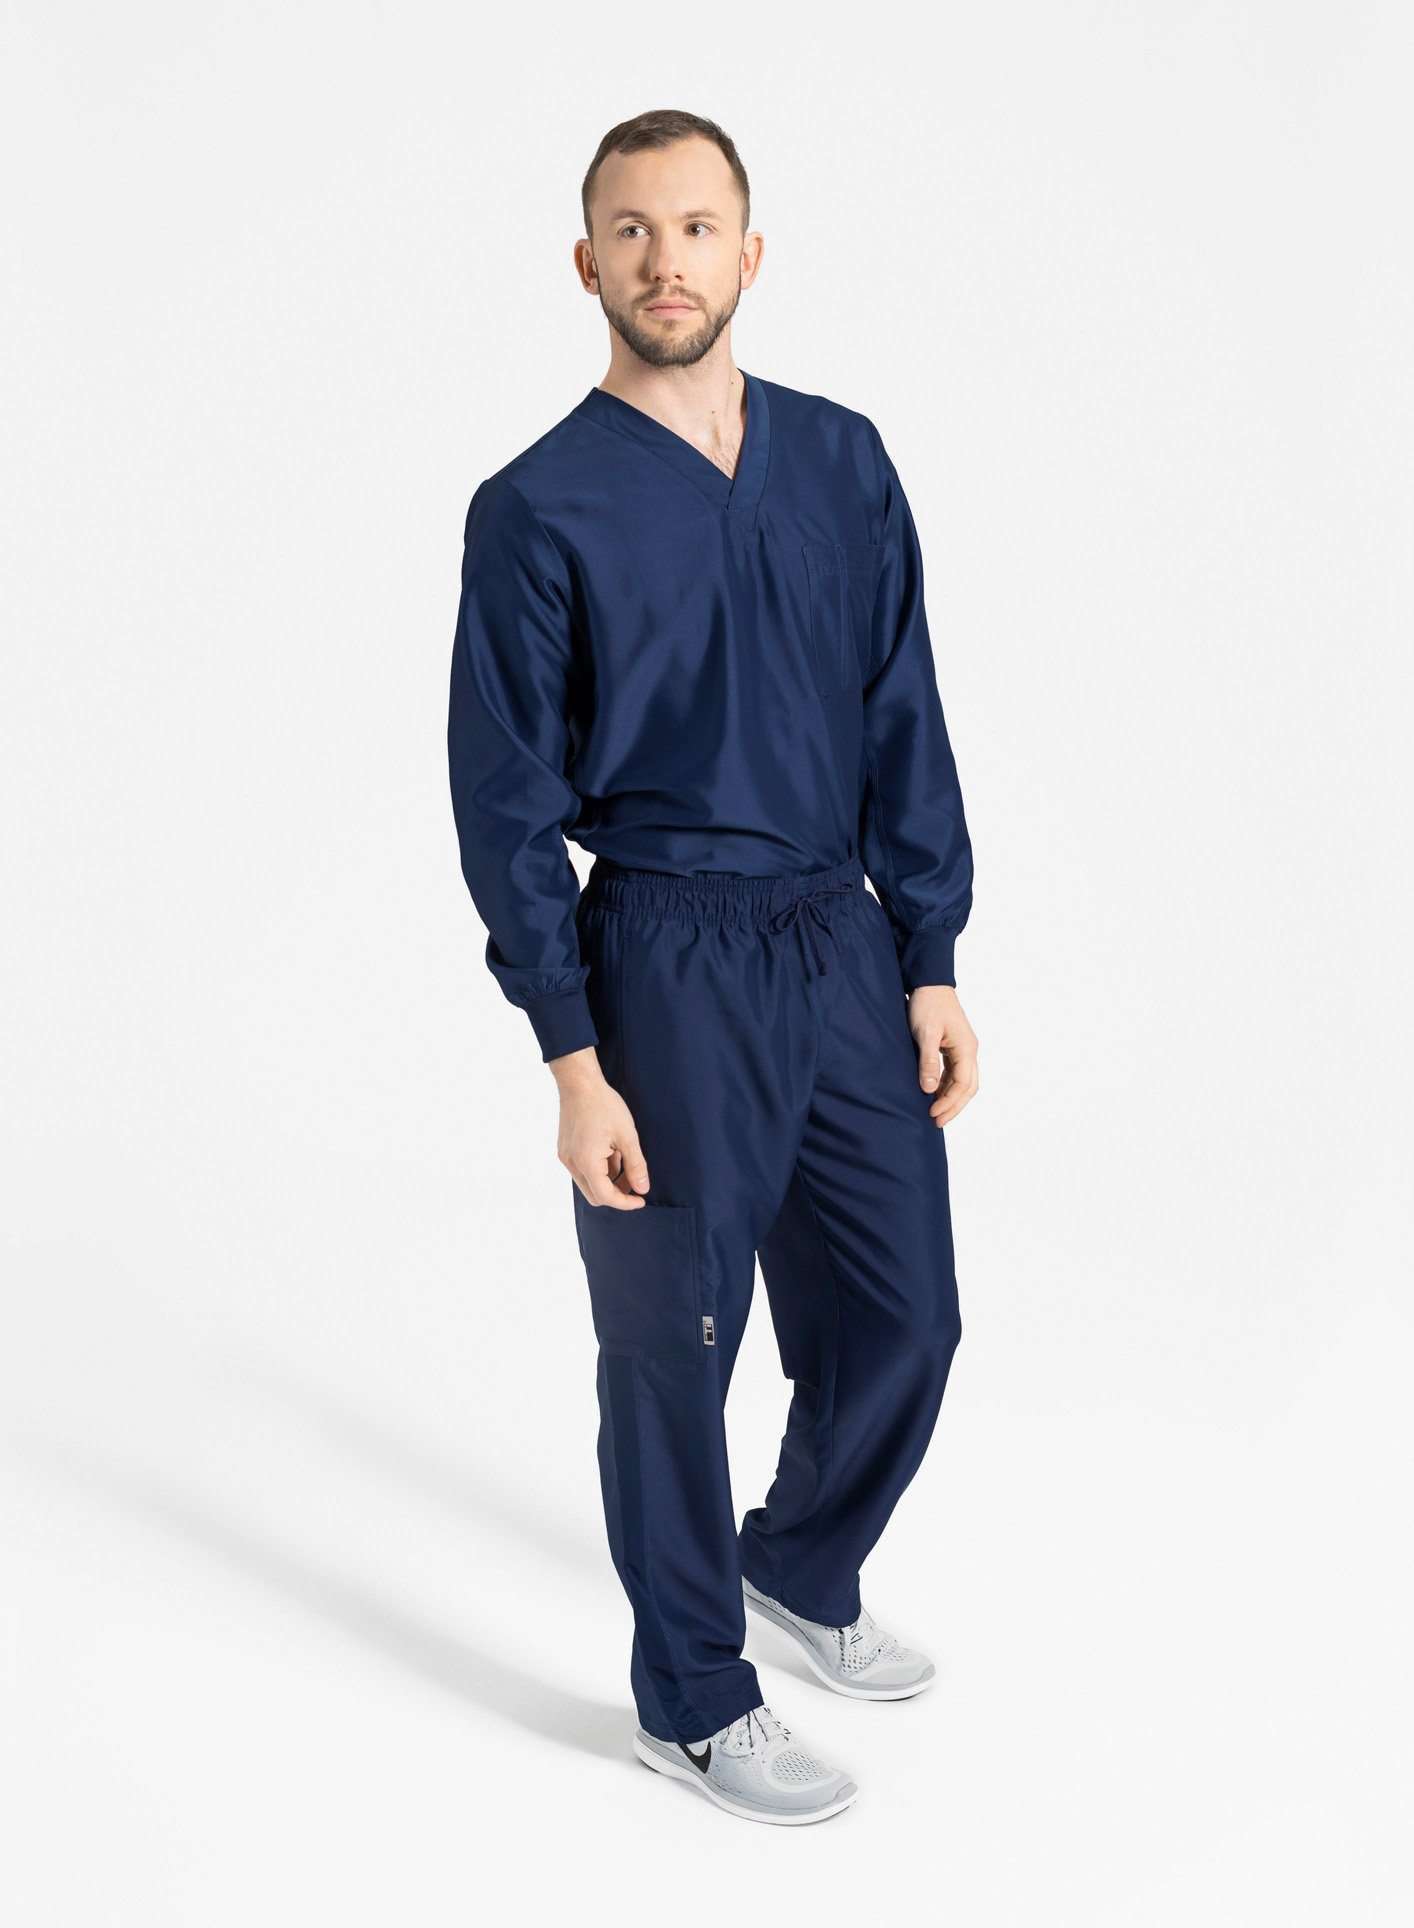 mens Elements navy blue long sleeve one pocket scrub top and pants 